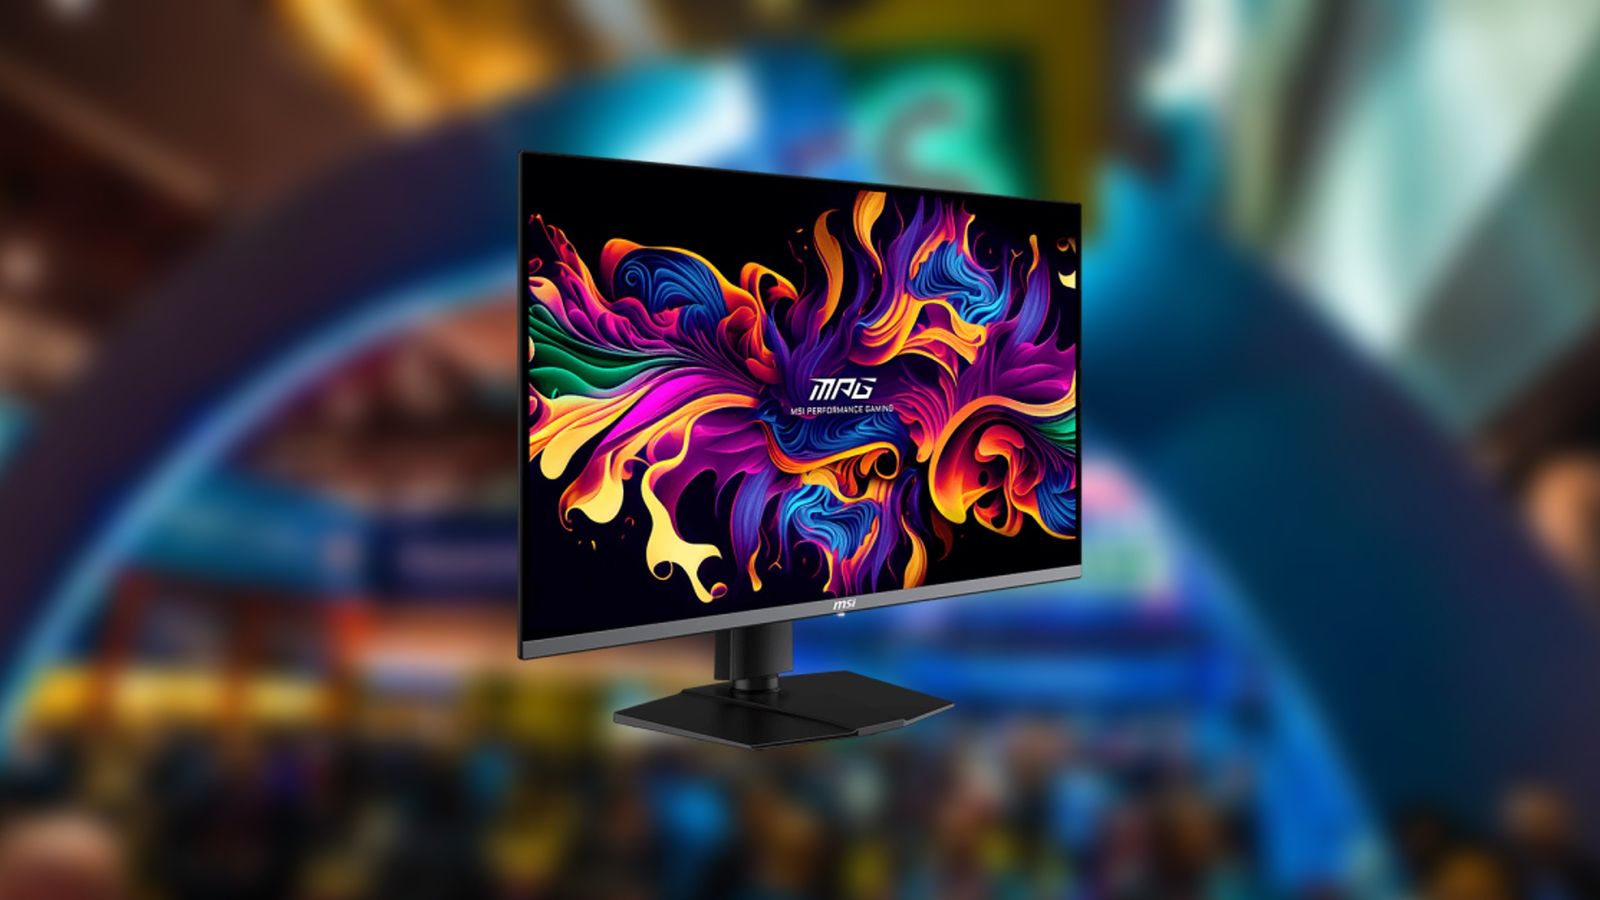 MSI MEG 321URX monitor in front of a blurred image of CES